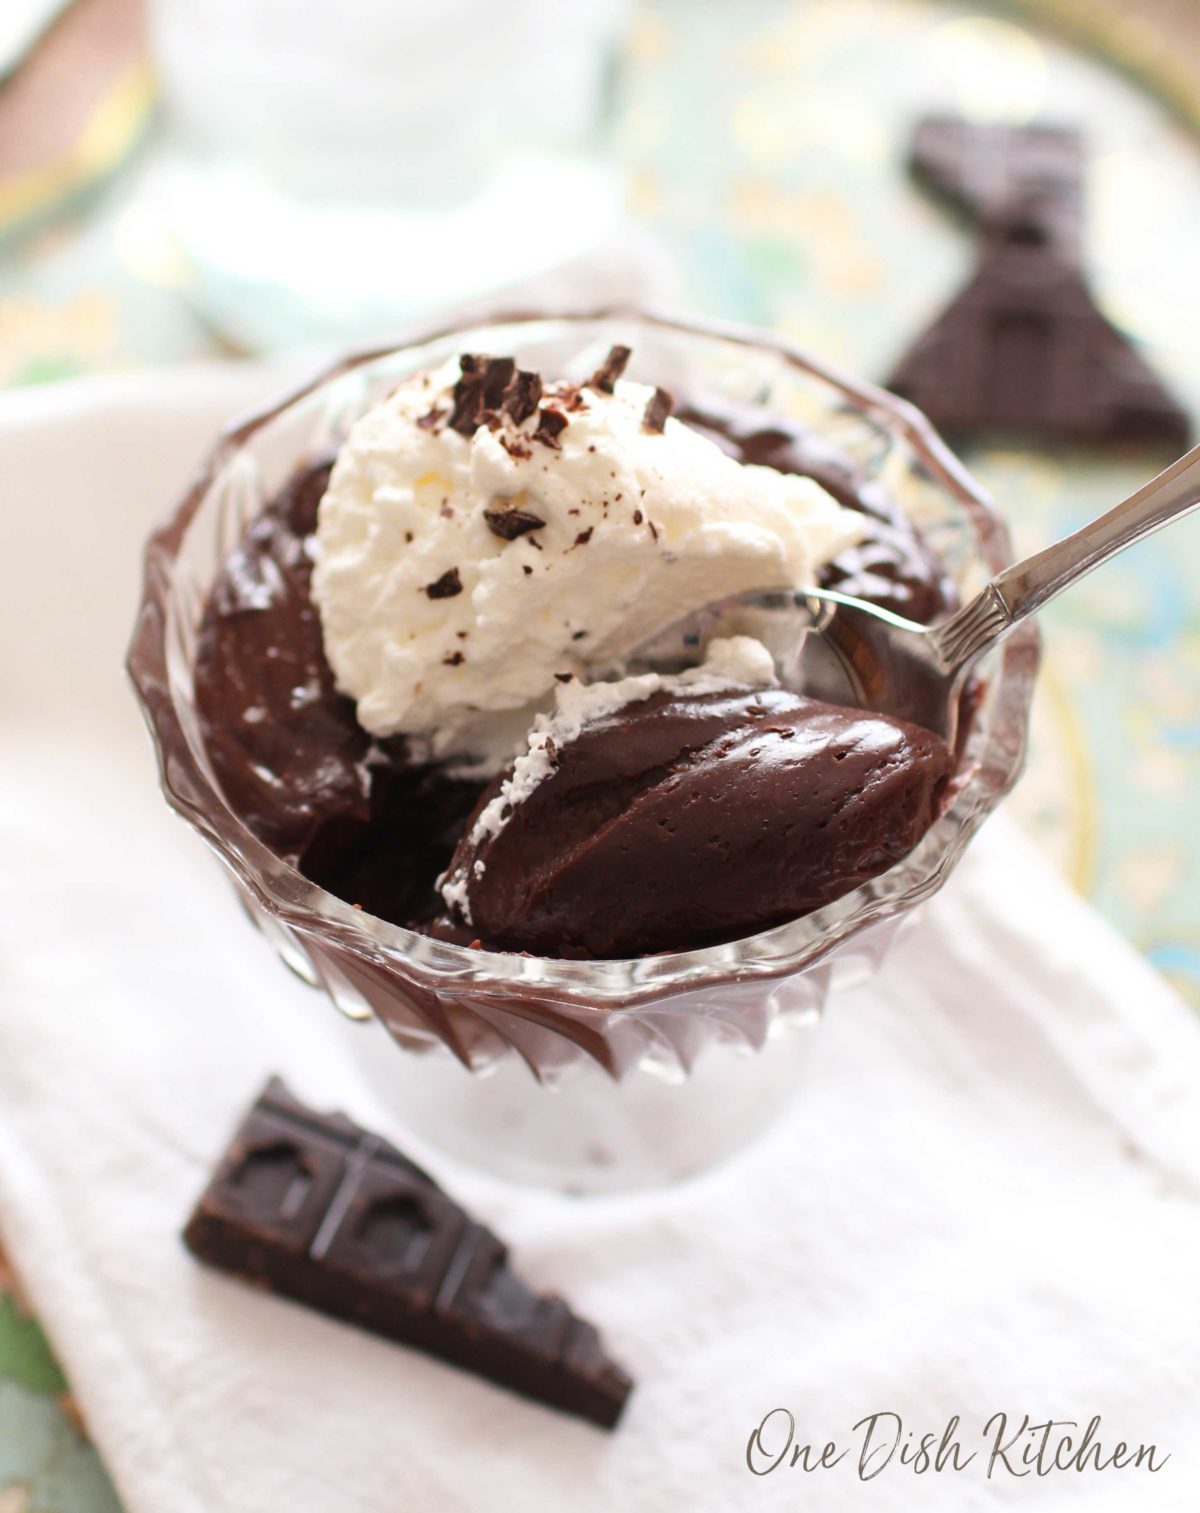 Overhead view of chocolate pudding topped with whipped cream and chocolate shavings in a dessert glass next to a piece of a chocolate bar and a spoon.